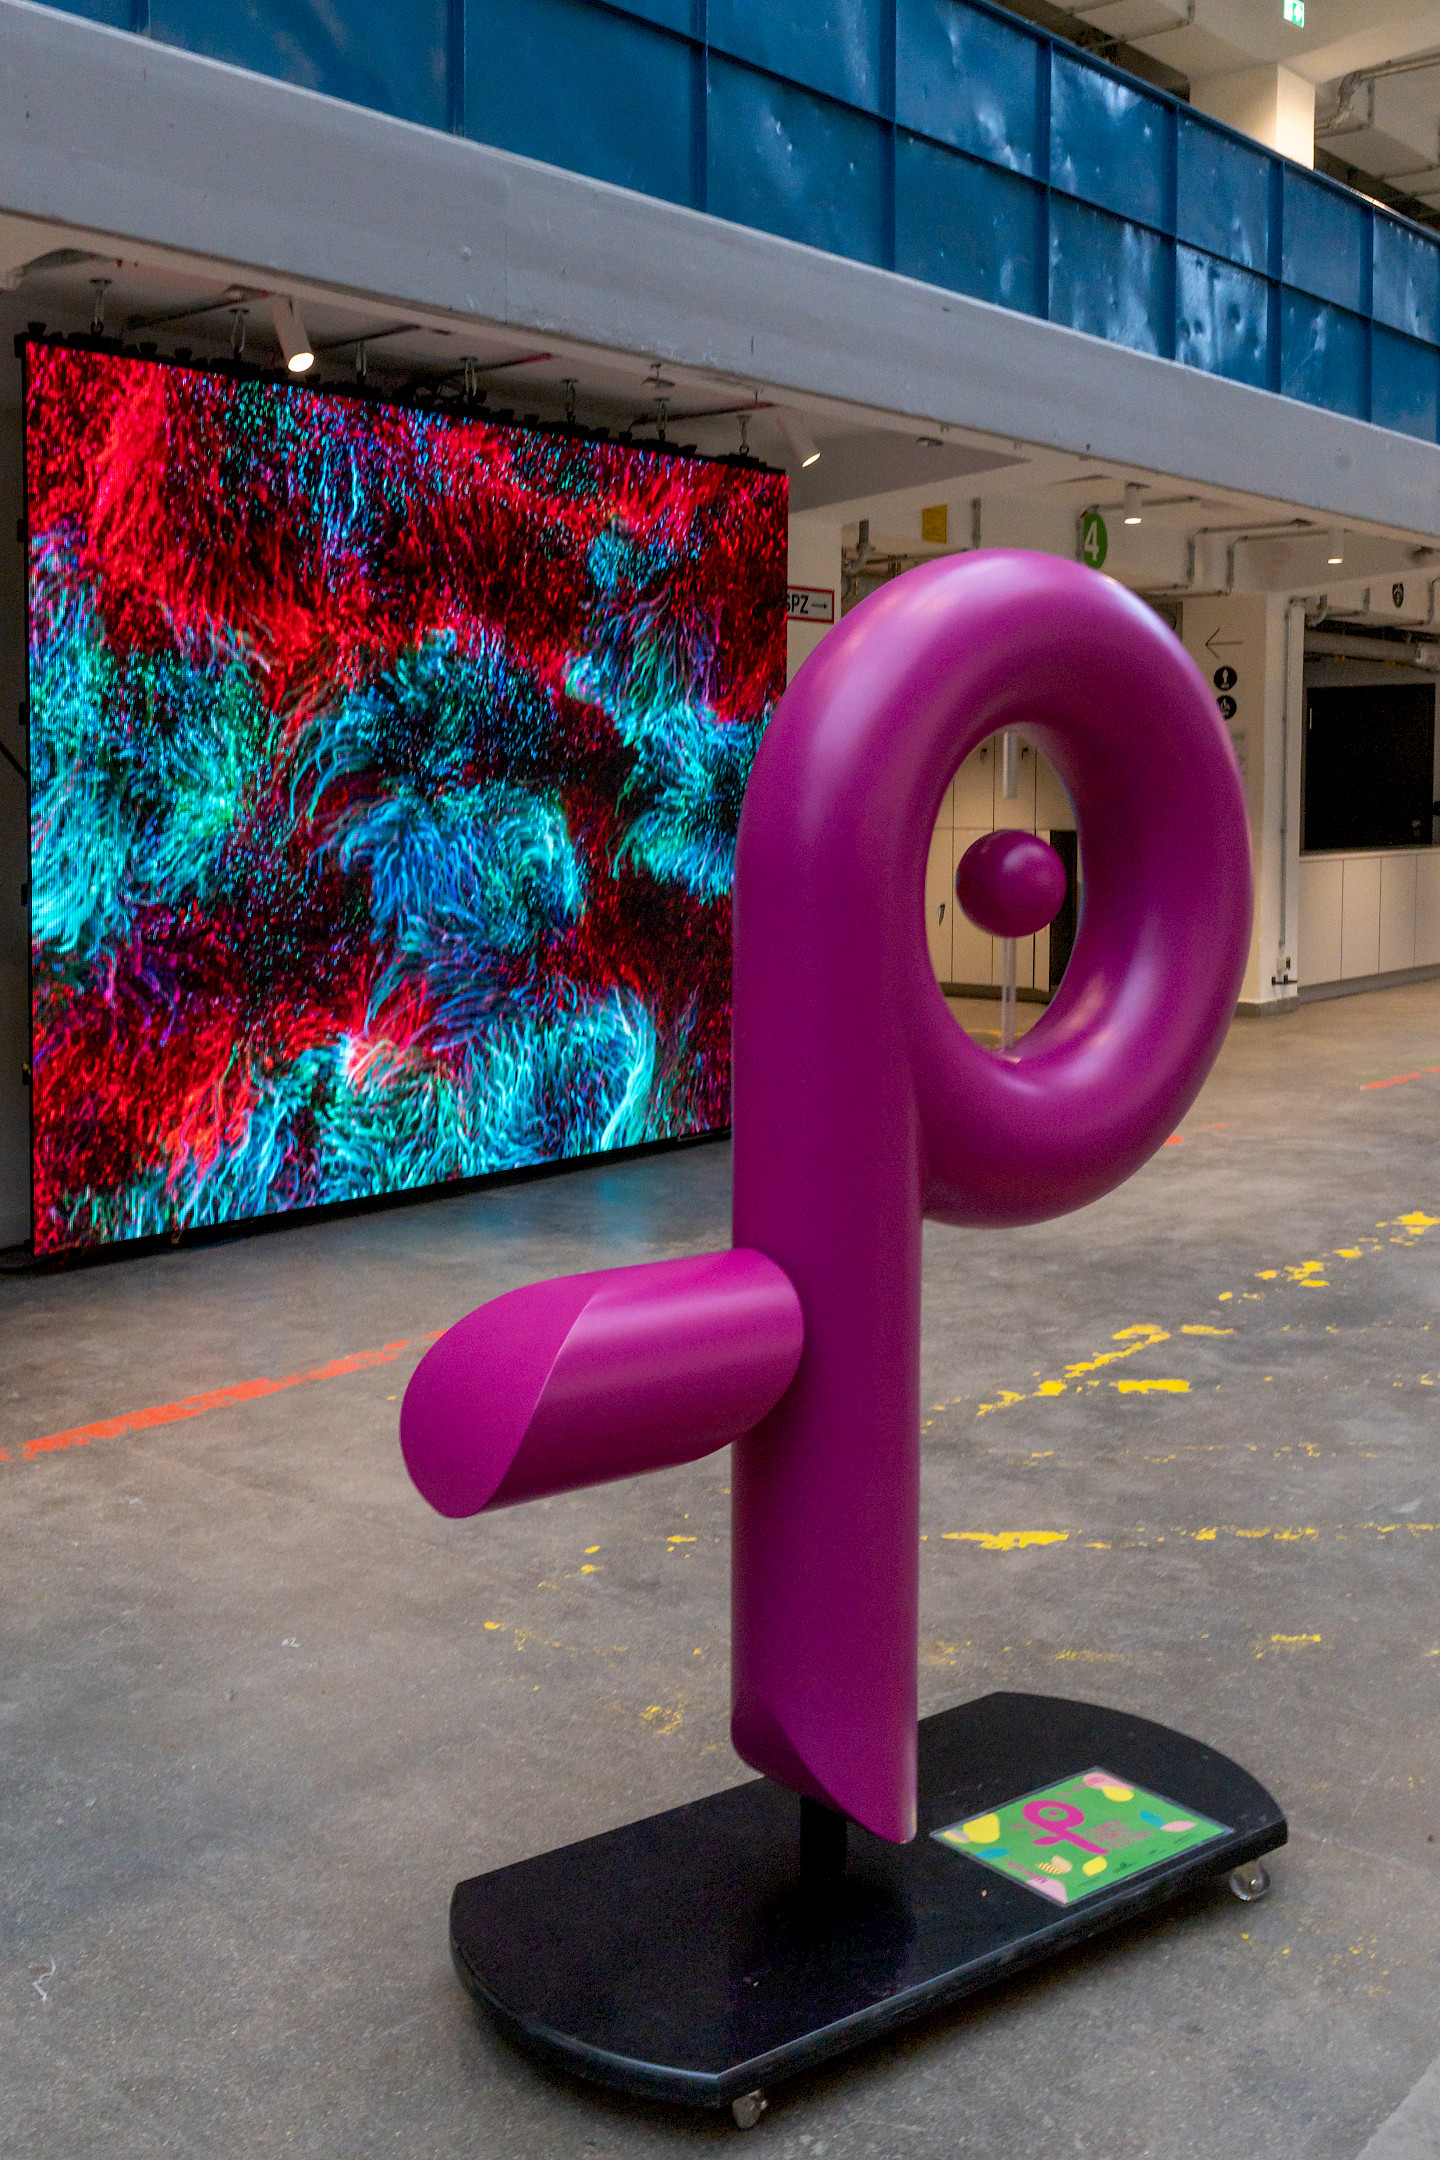 The flower power symbol stands in front of the interactive LED wall.